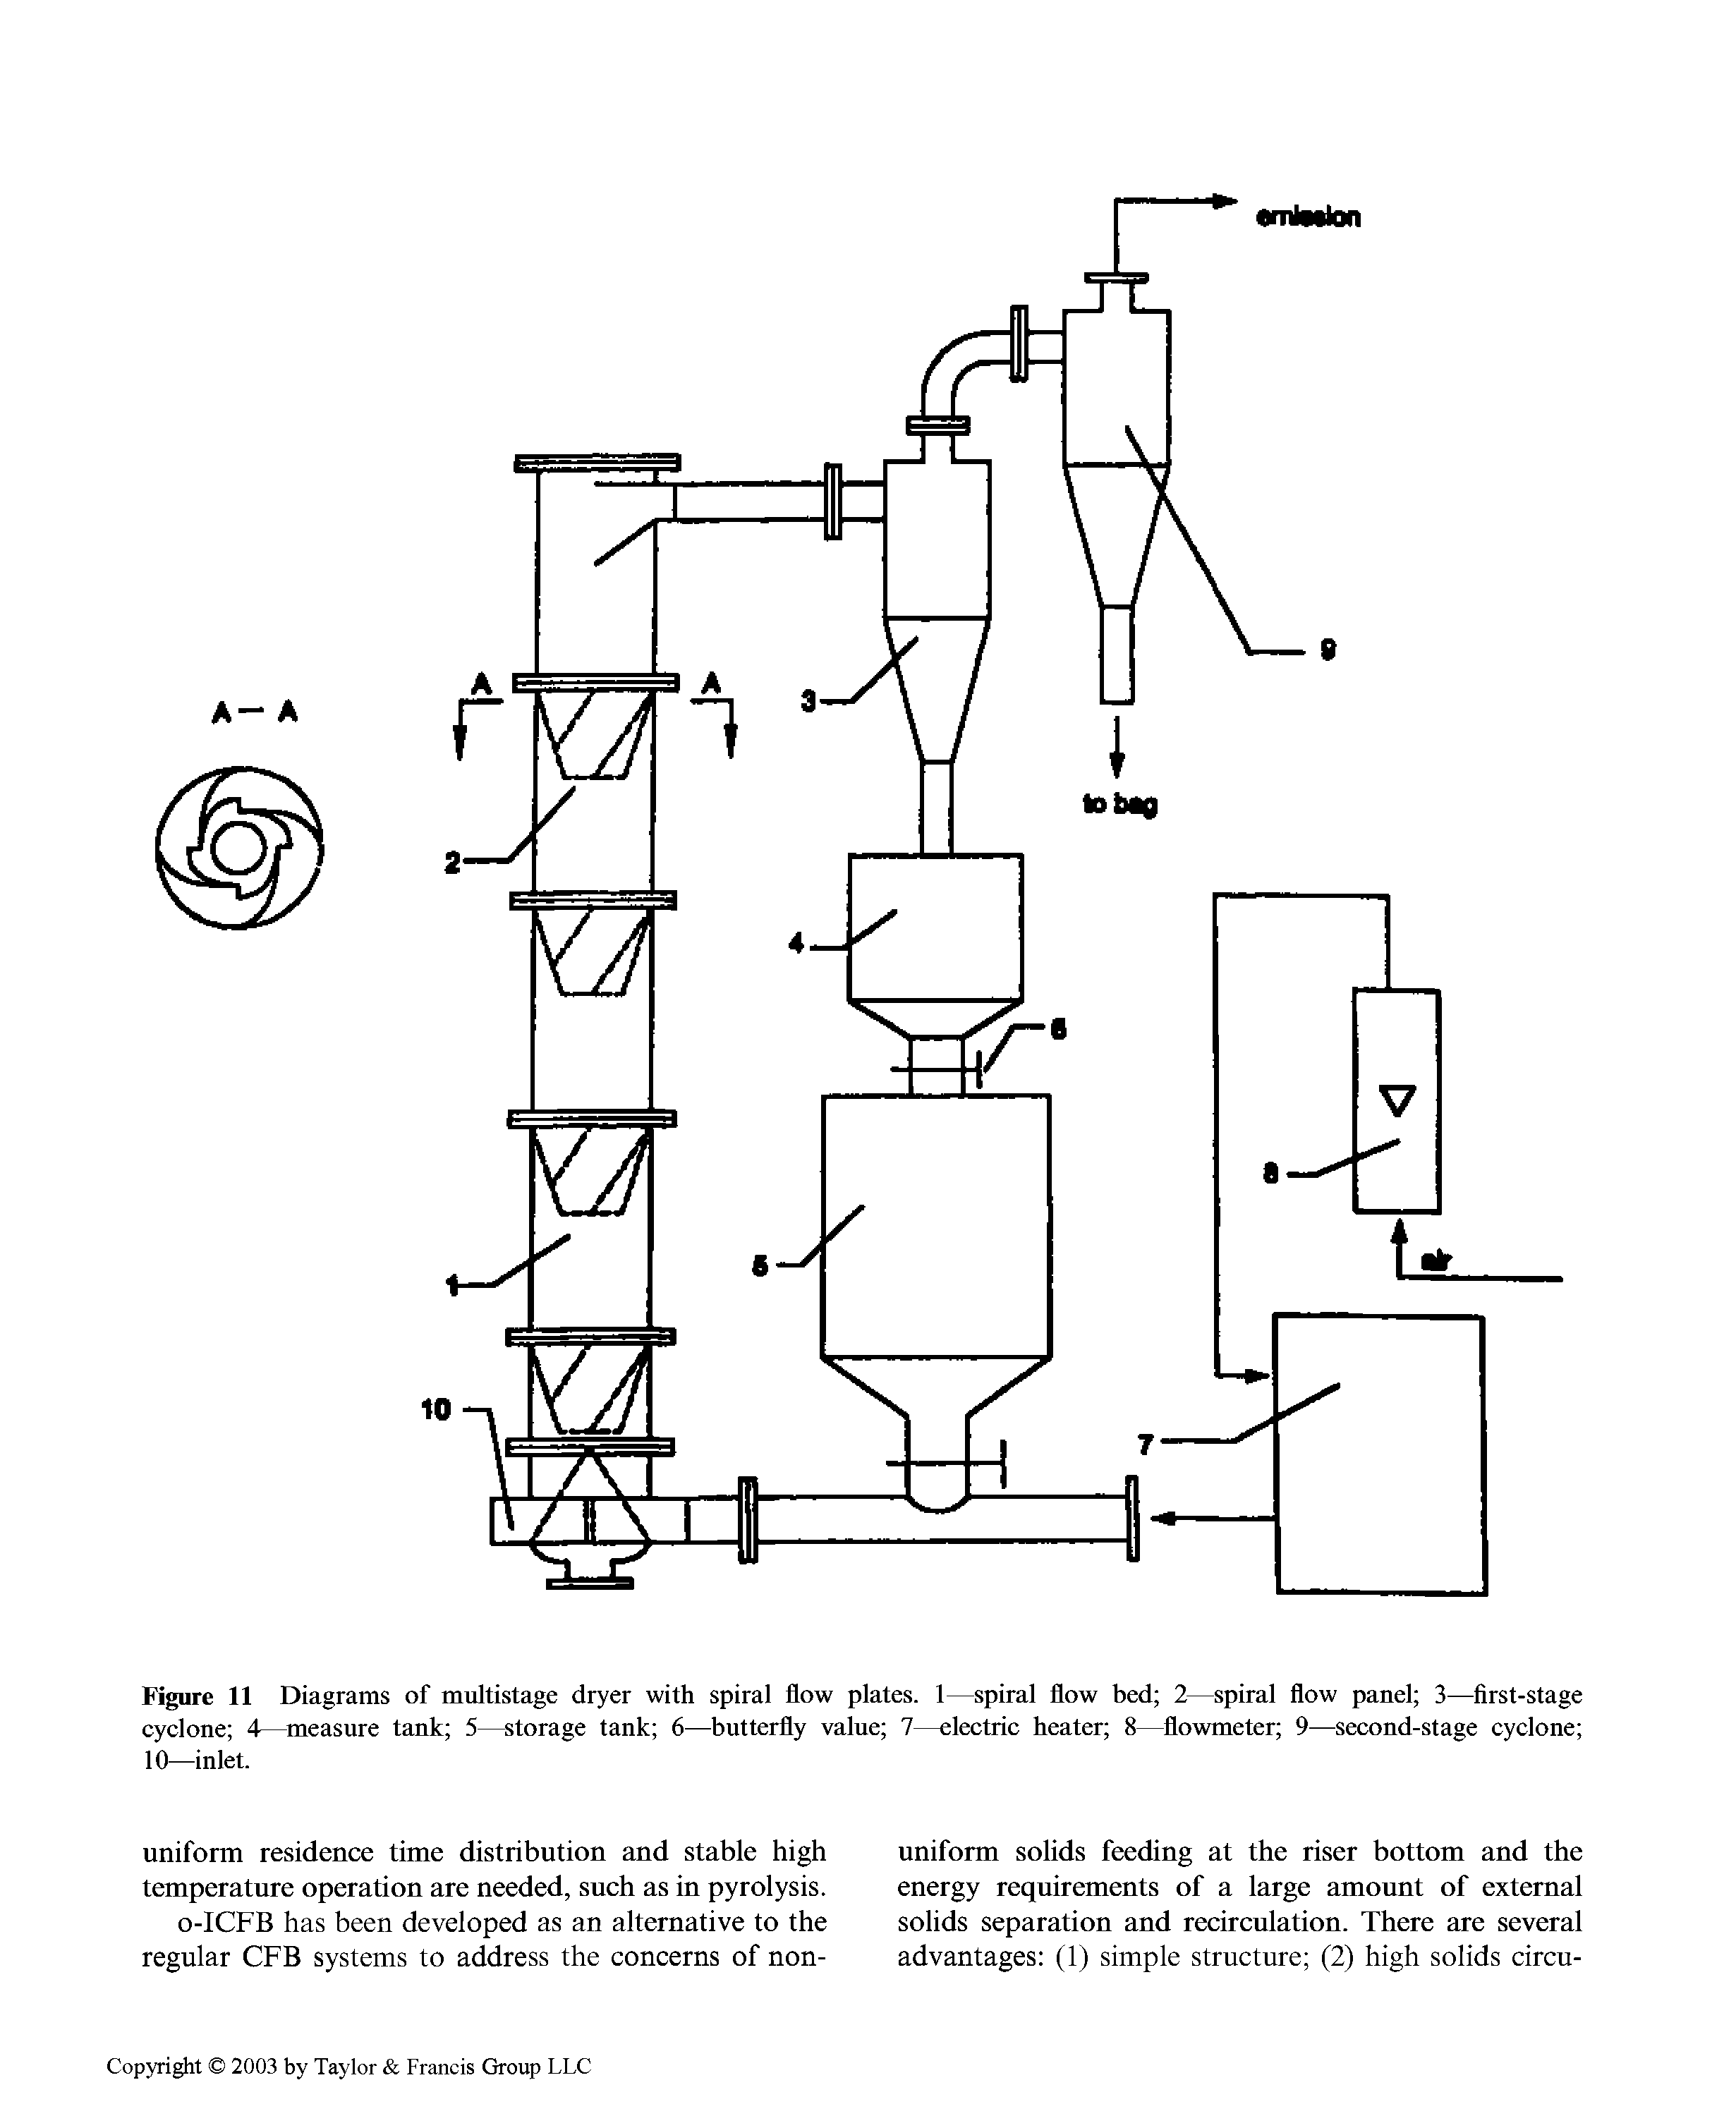 Figure 11 Diagrams of multistage dryer with spiral flow plates. 1—spiral flow bed 2—spiral flow panel 3—first-stage cyclone 4—measure tank 5 storage tank 6—butterfly value 7—electric heater 8—flowmeter 9—second-stage cyclone 10—inlet.